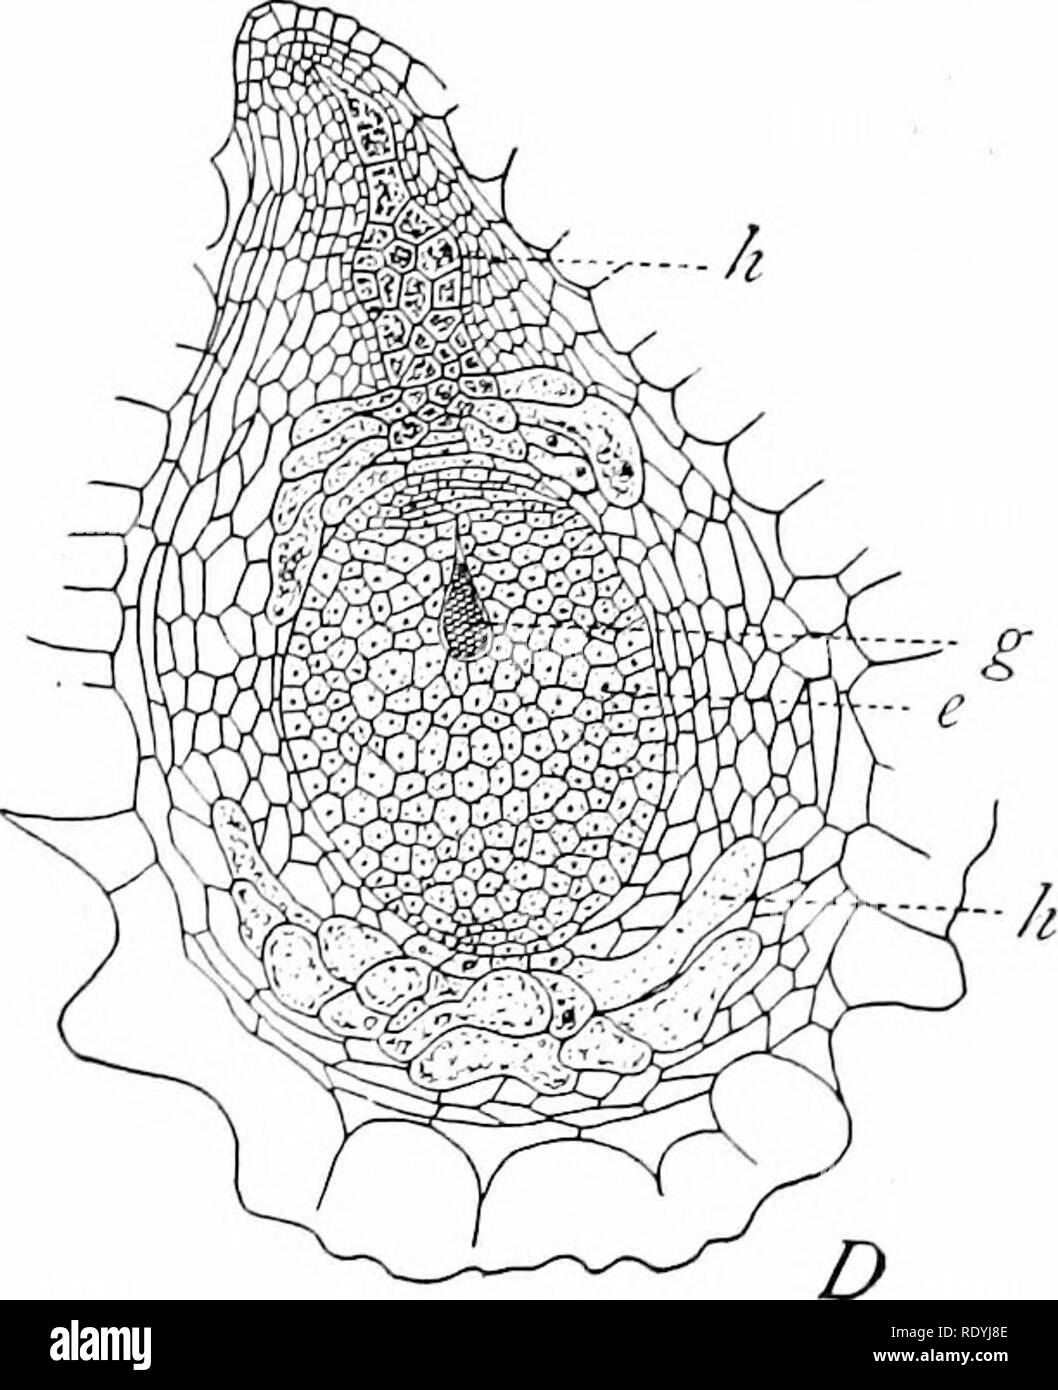 . Morphology of angiosperms (Morphology of spermatophytes. Part II). Angiosperms; Plant morphology. Fig. 50.—.-1, Globularia cordifolia, the micropylar end of the embryo-sac has grown out into an extensive haustorium furnished with nuclei from the endosperm;/&quot;, funiculus; after Billings.100 J?, Plantago lanceolata, longitudinal section of ovule after embryo is somewhat advanced, showing extensive haustorial system; after Balicka-Iwanowska.88 C, Stylidium squamellosum, embryo-sac after second division of endosperm nucleus; e, egg;/', pollen-tube; after Burns.65 /&gt;, Byblis gigantea, long Stock Photo